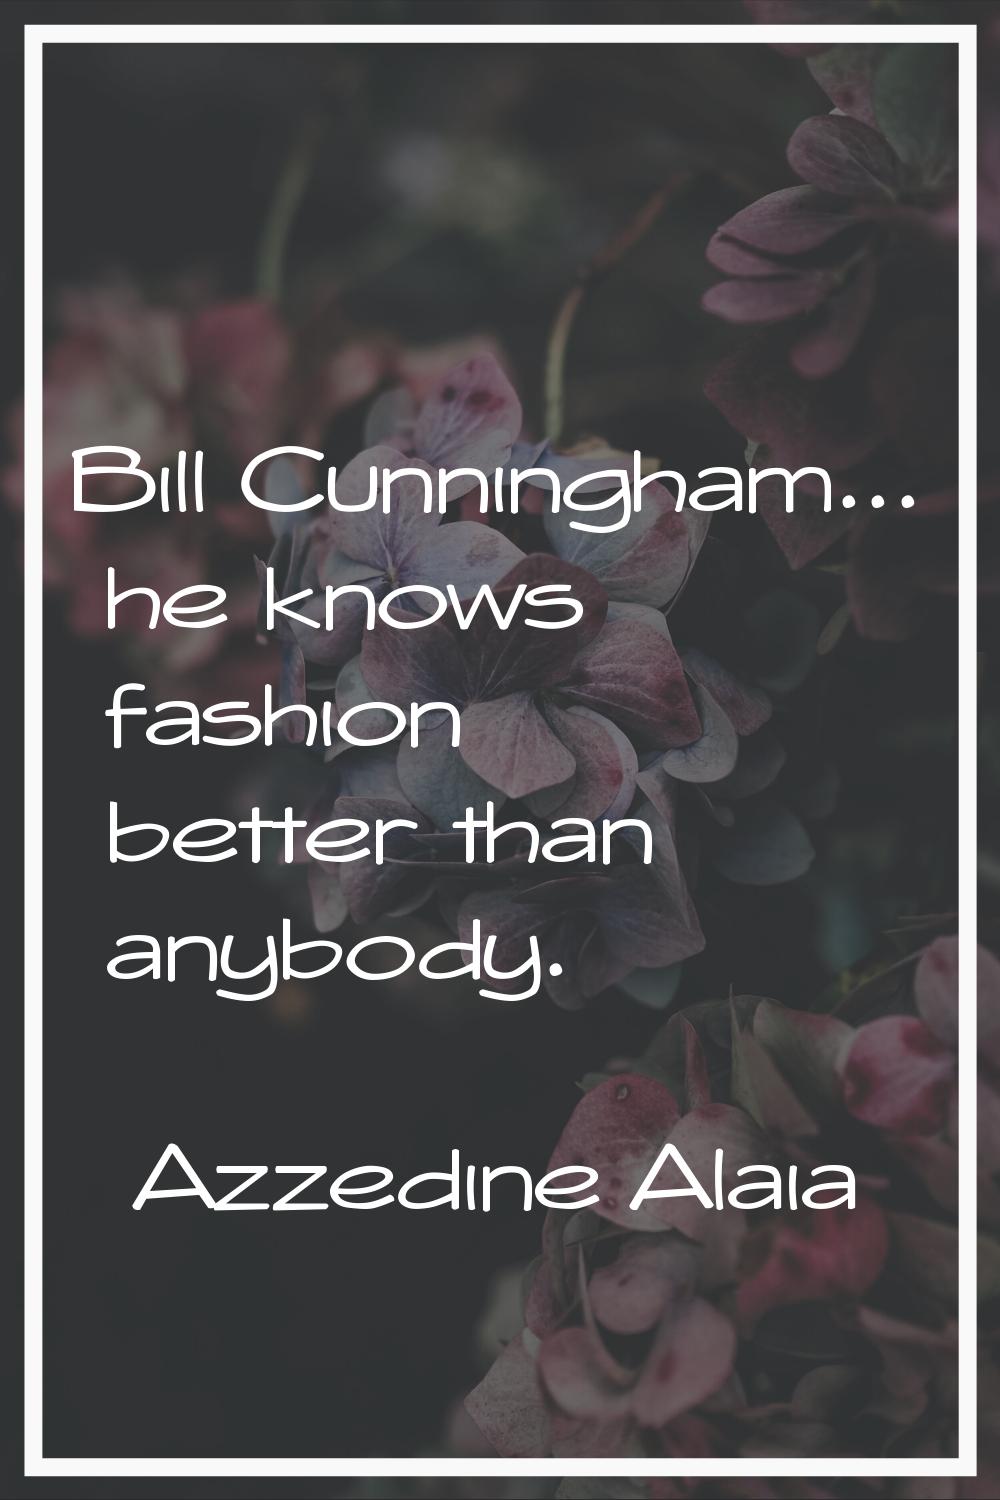 Bill Cunningham... he knows fashion better than anybody.